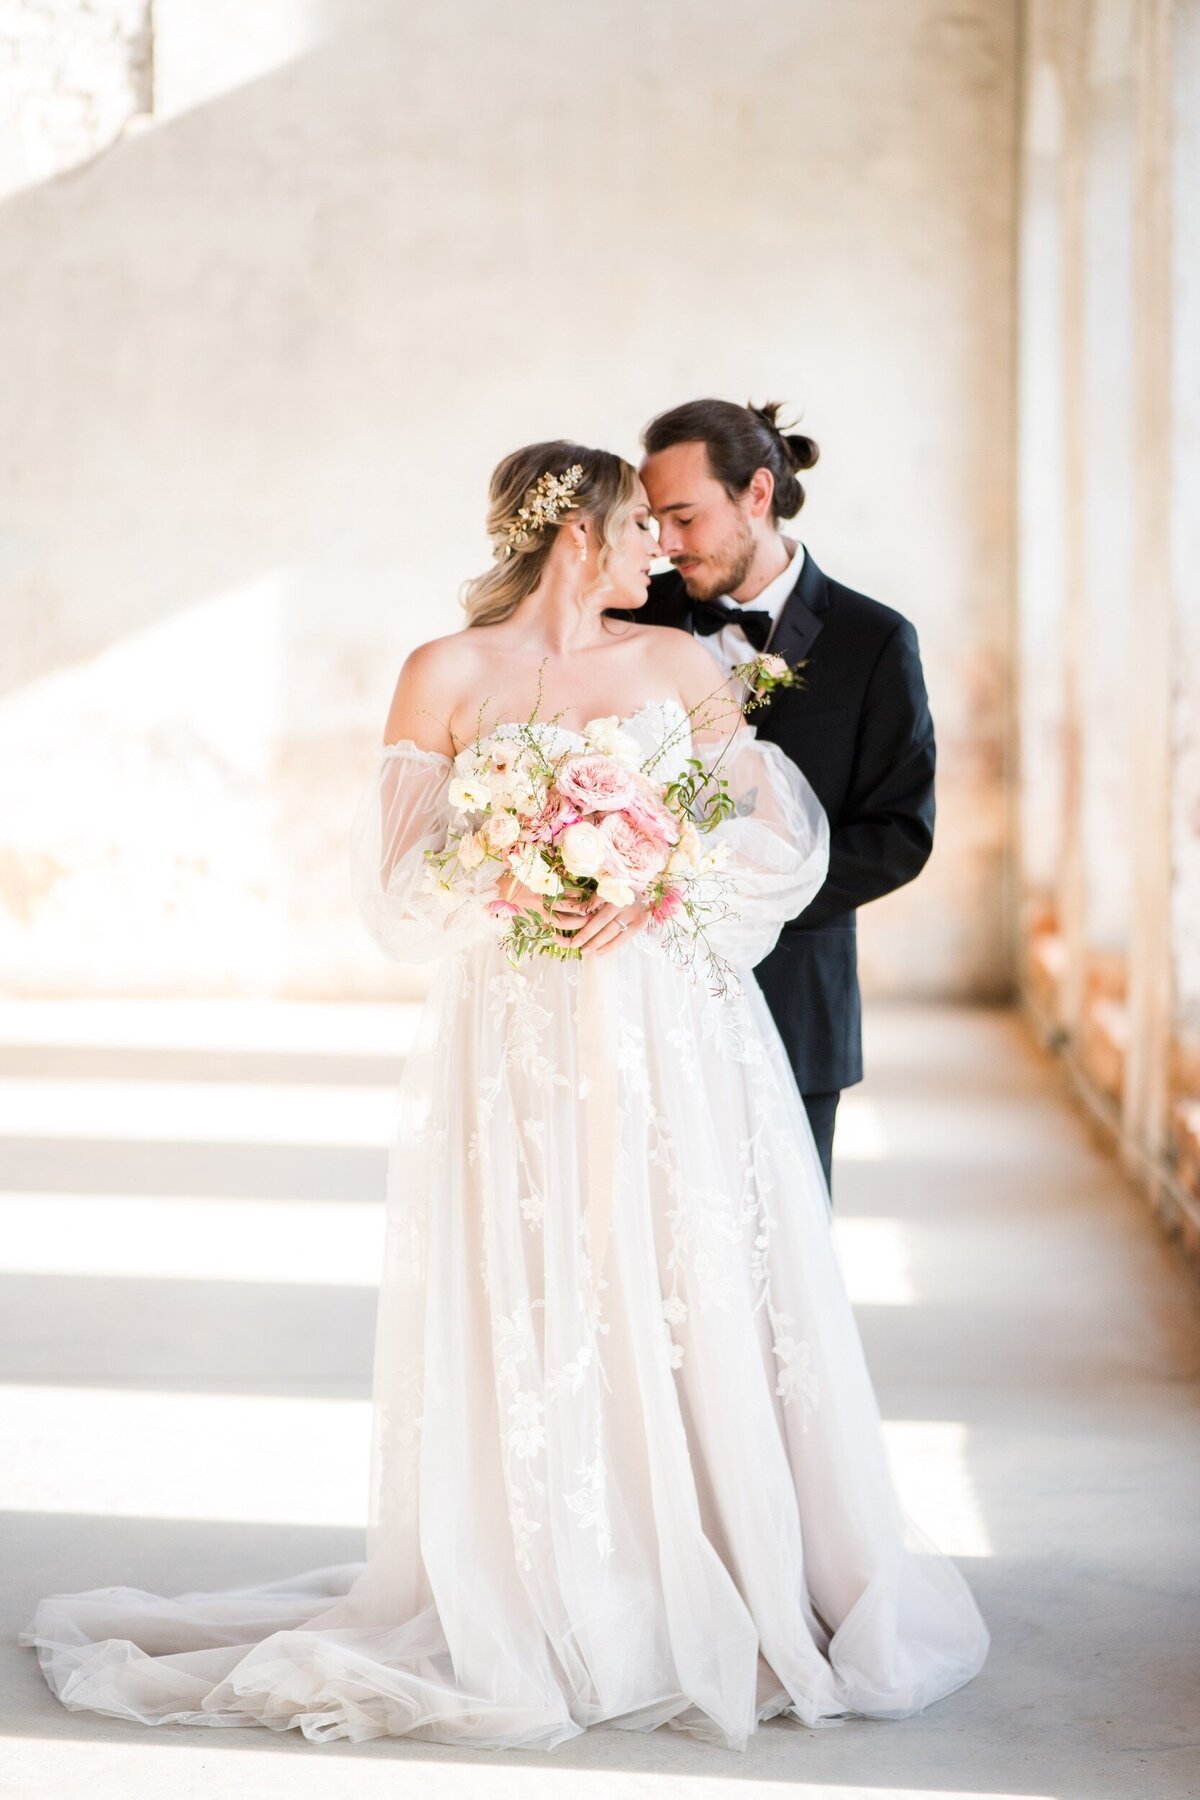 A newly married couple nestles together in Providence Cotton Mill wedding venue near Charlotte, NC.